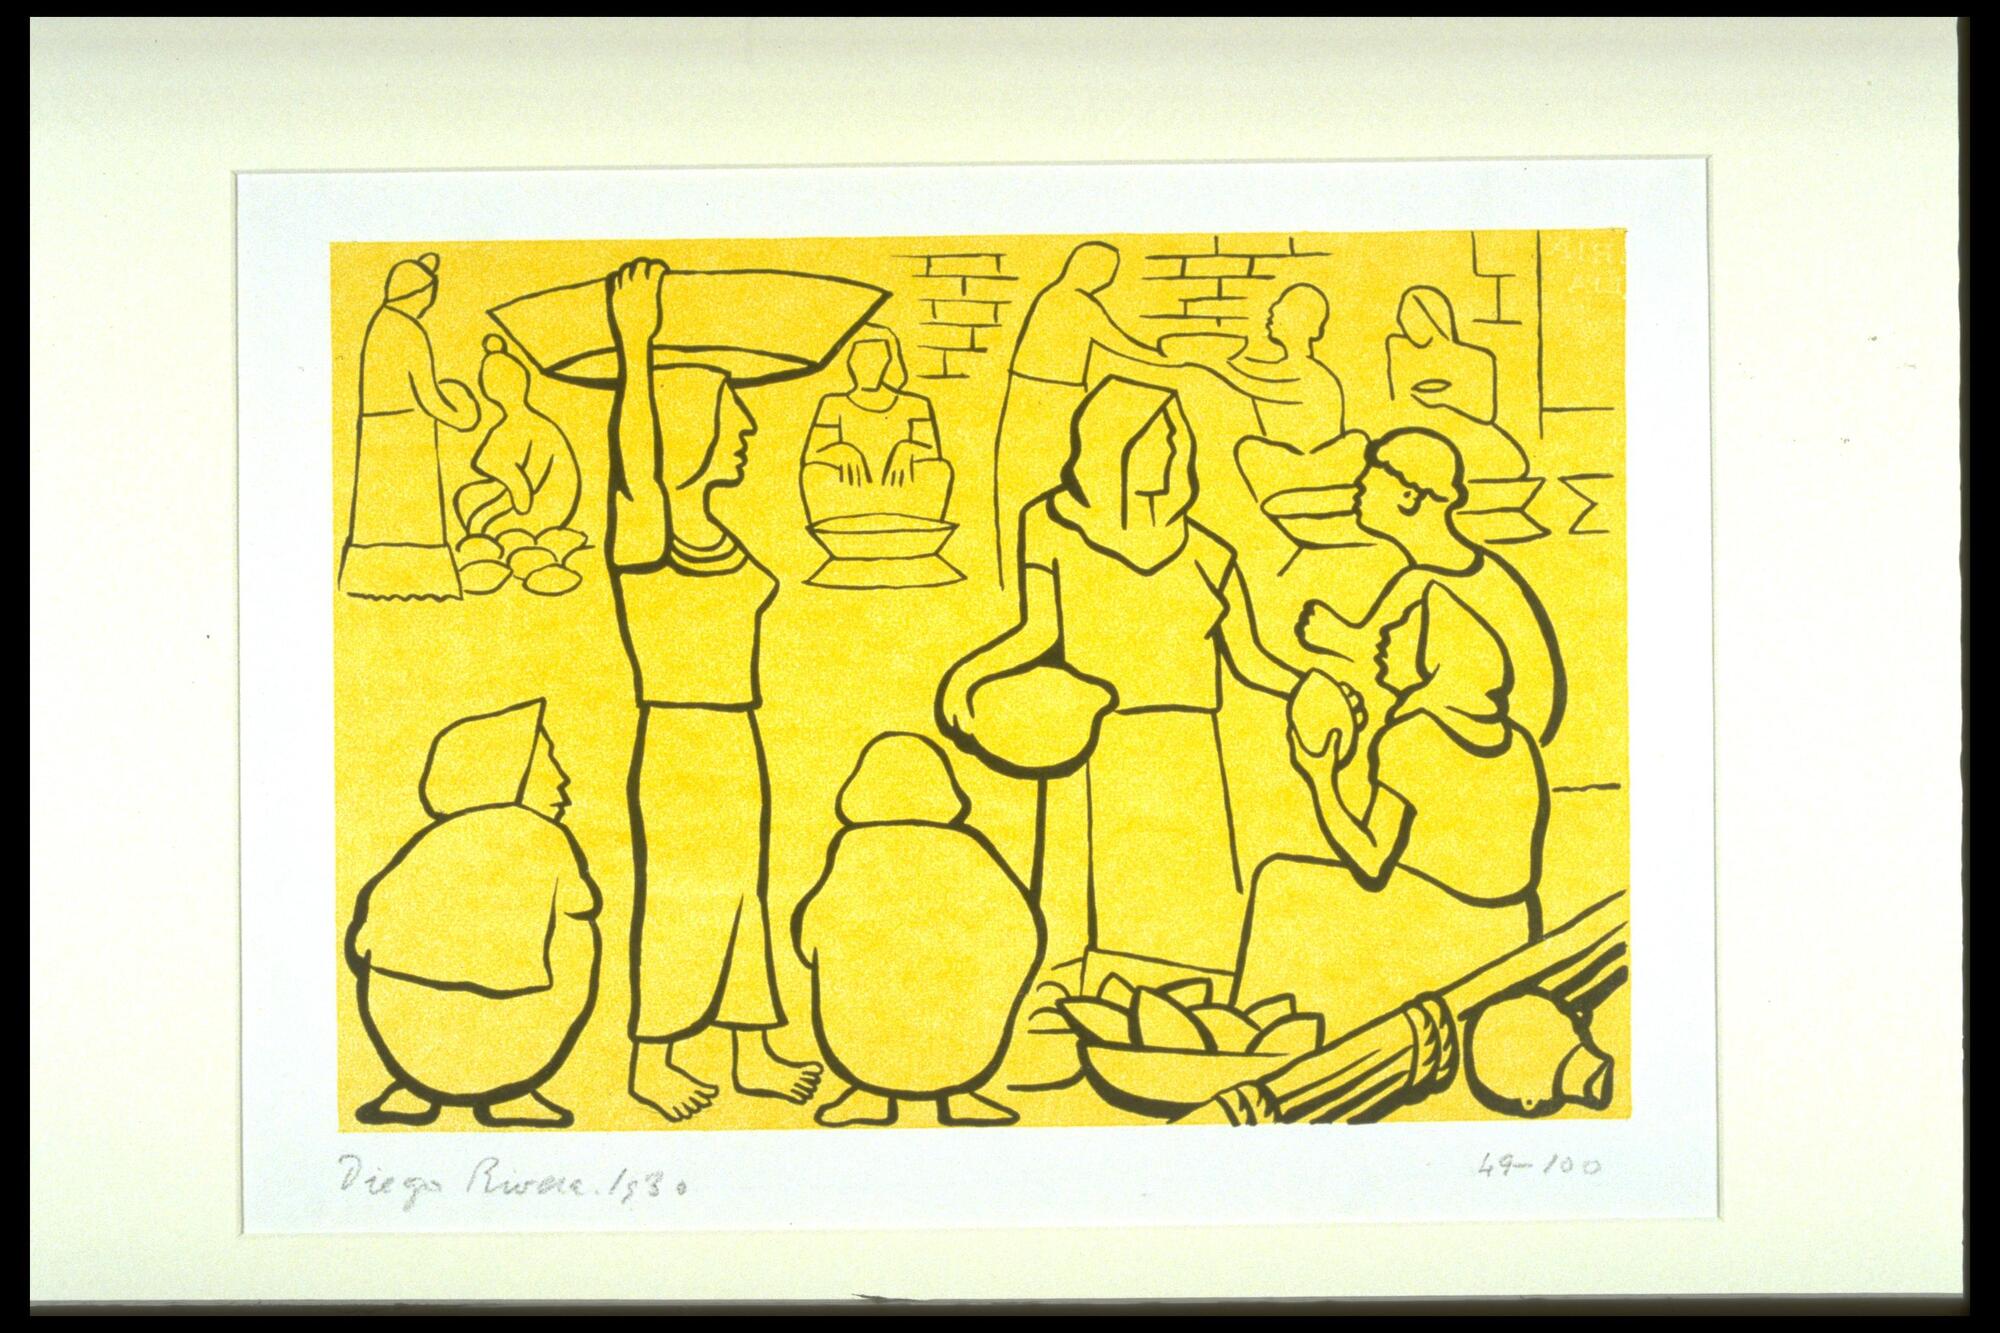 This print is a contour drawing of several rows of figures: in the foreground are three squating figures facing away from the viewer; in the background are several squatting figures facing the viewer, and in between are standing figures. The squatting figures sit before the goods they are selling and the standing figures are purchasing from them. 